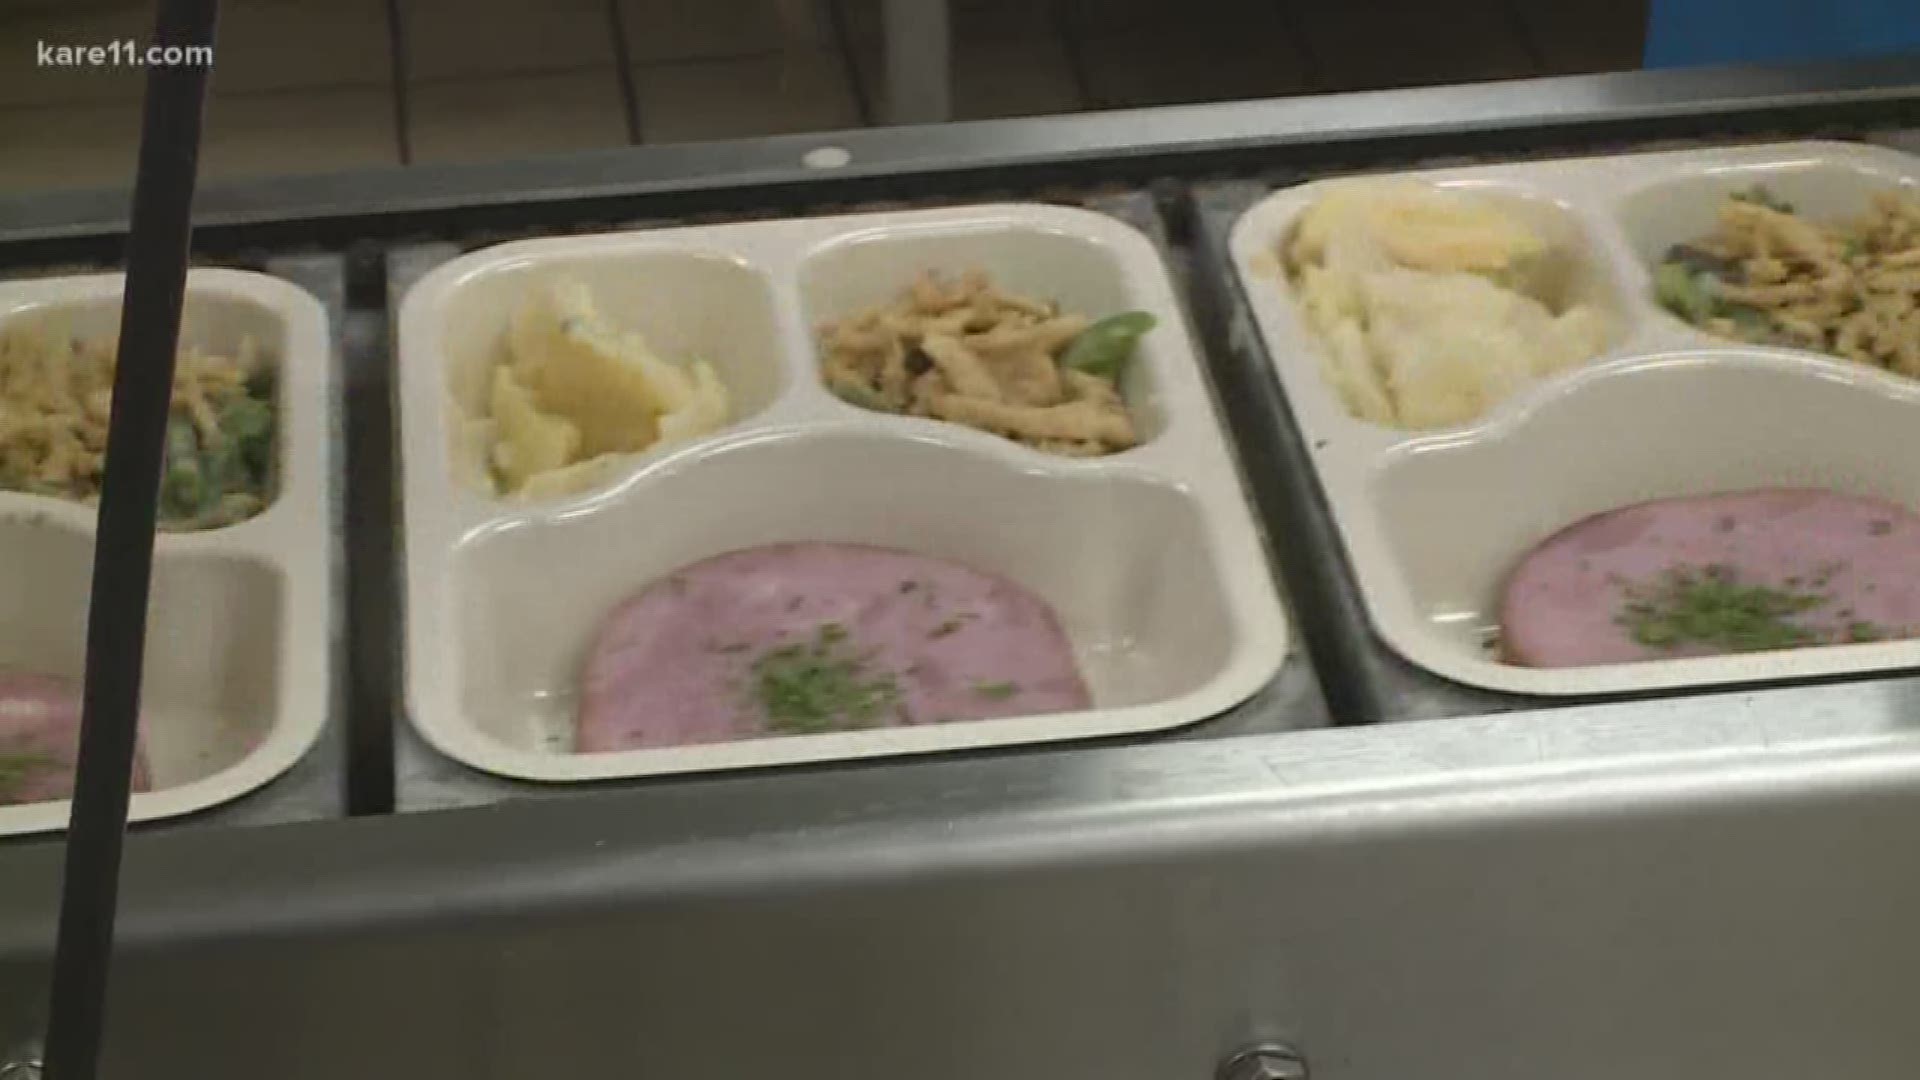 The brutal cold's also affecting food services. Twin Cities Meals on Wheels is suspending deliveries tomorrow.
Even today closed public schools in Minneapolis sent meals to students in other places.